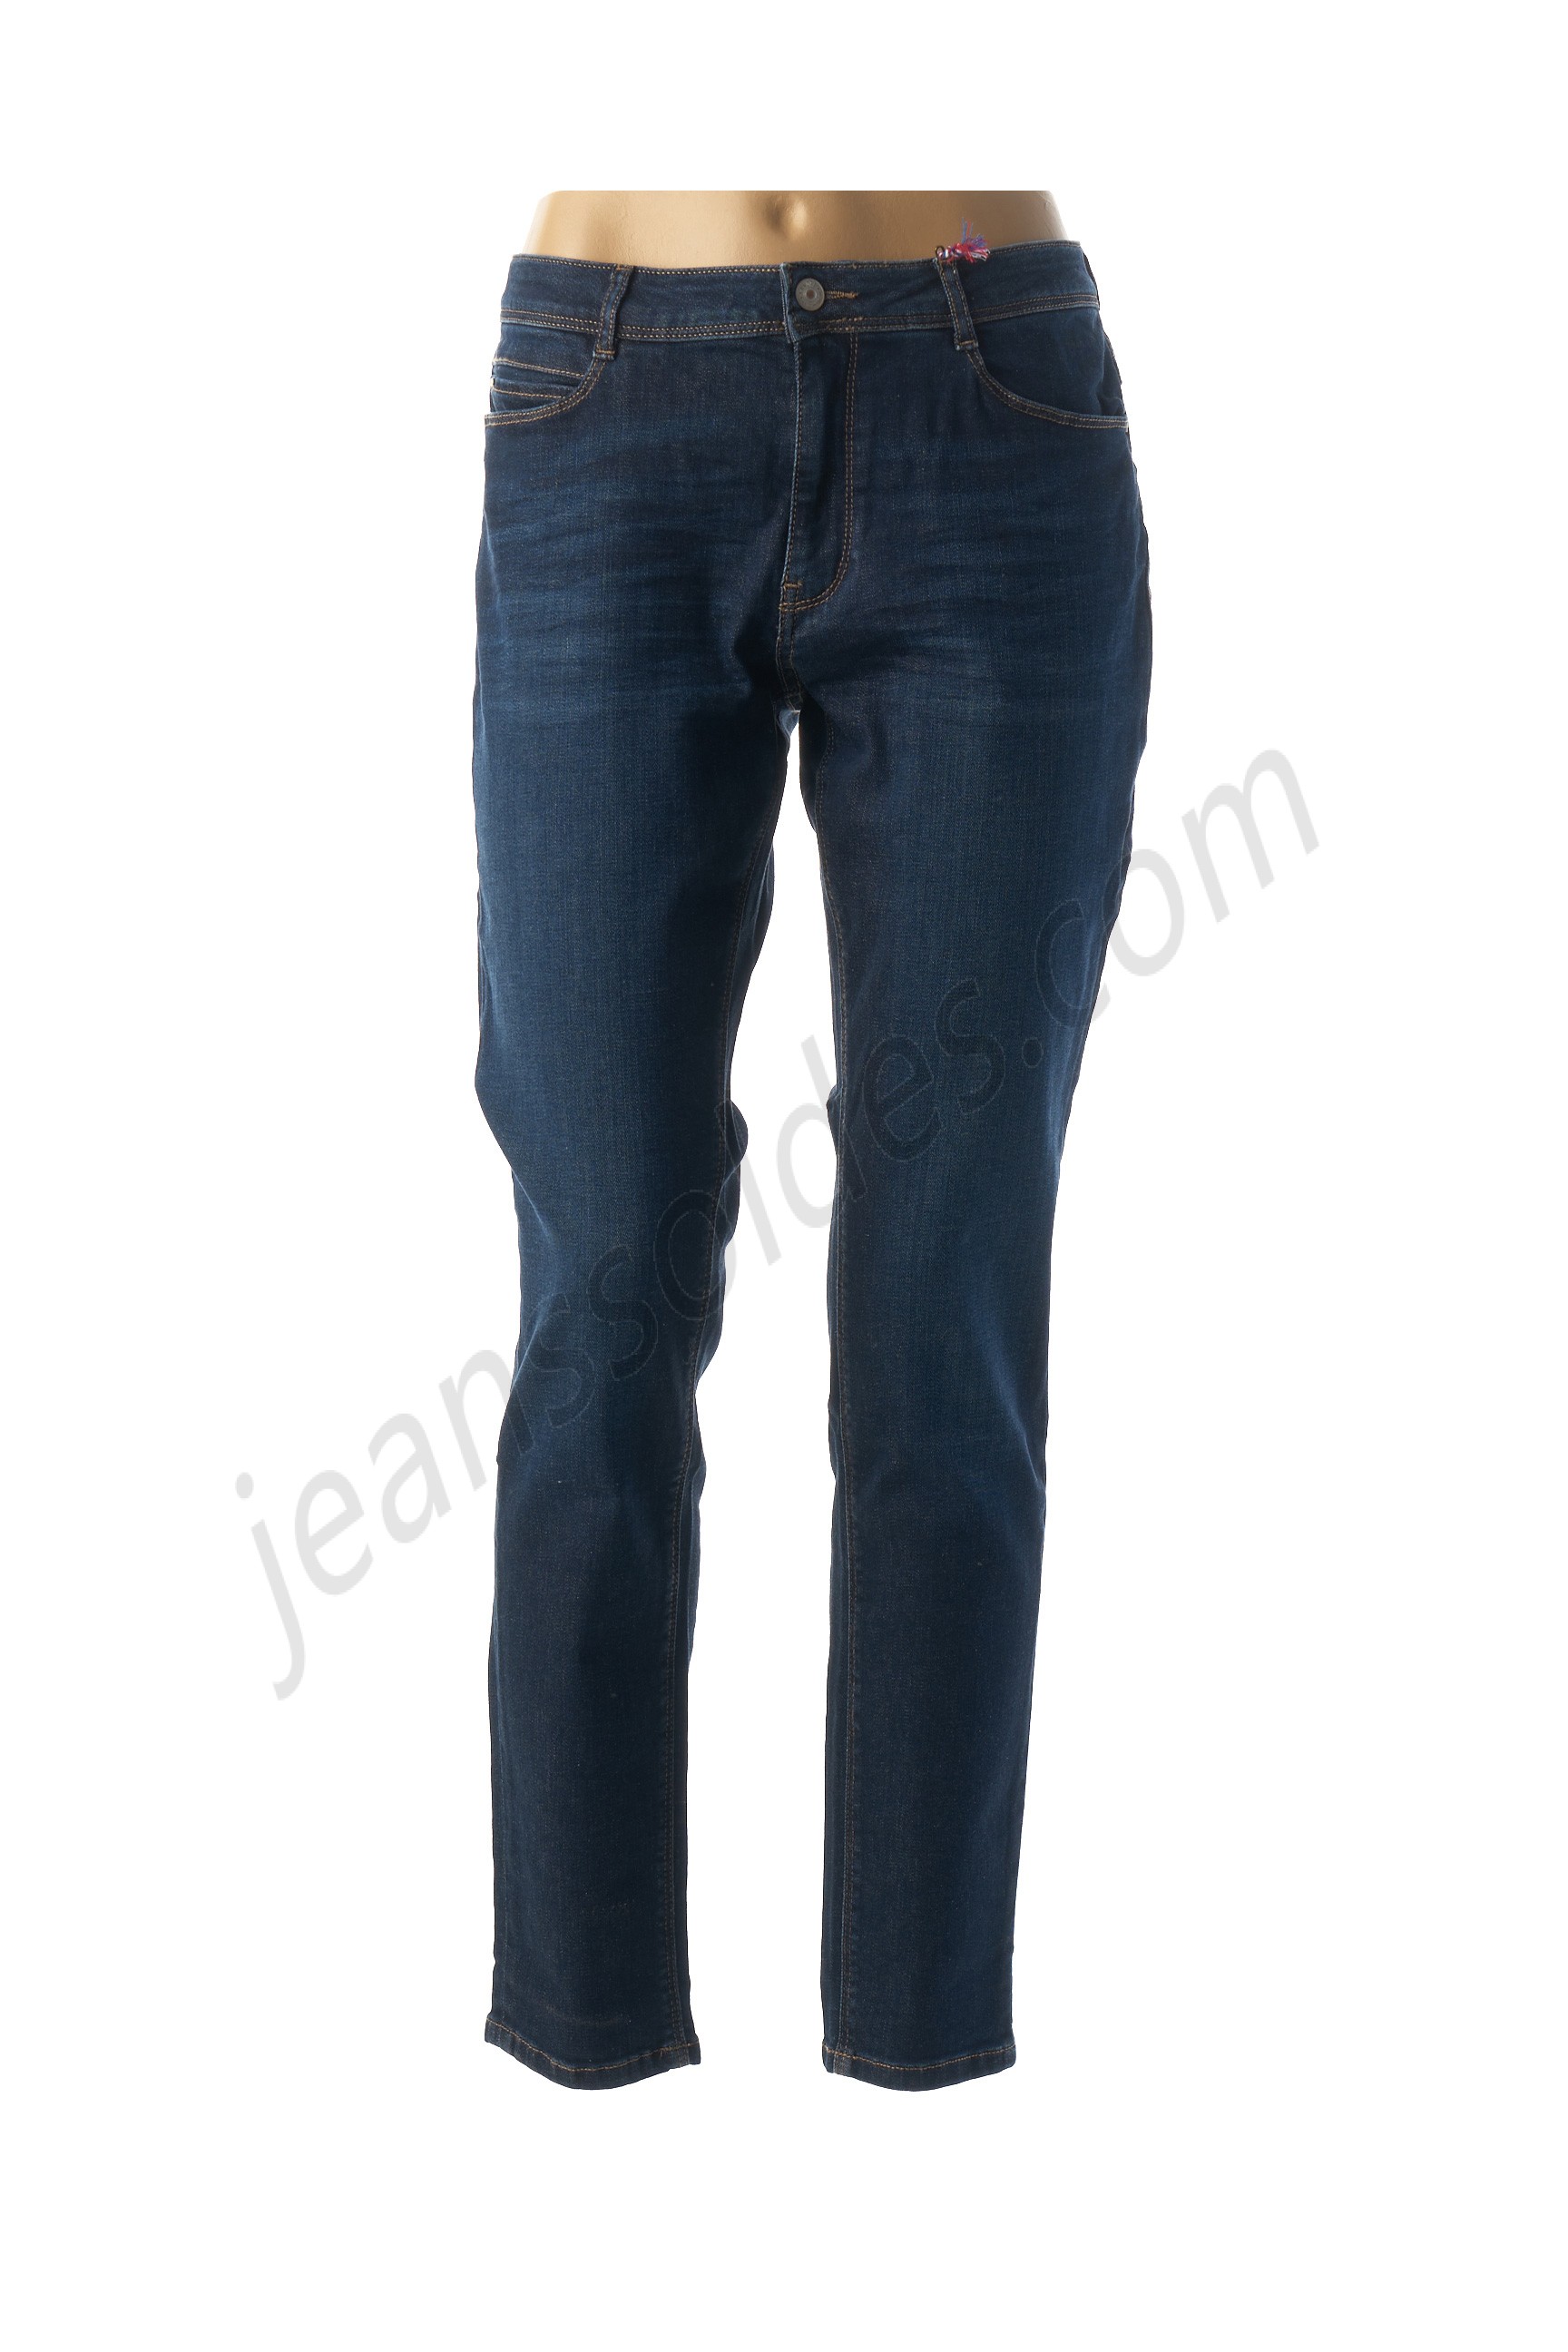 kanope-Jeans coupe slim prix d’amis - kanope-Jeans coupe slim prix d’amis